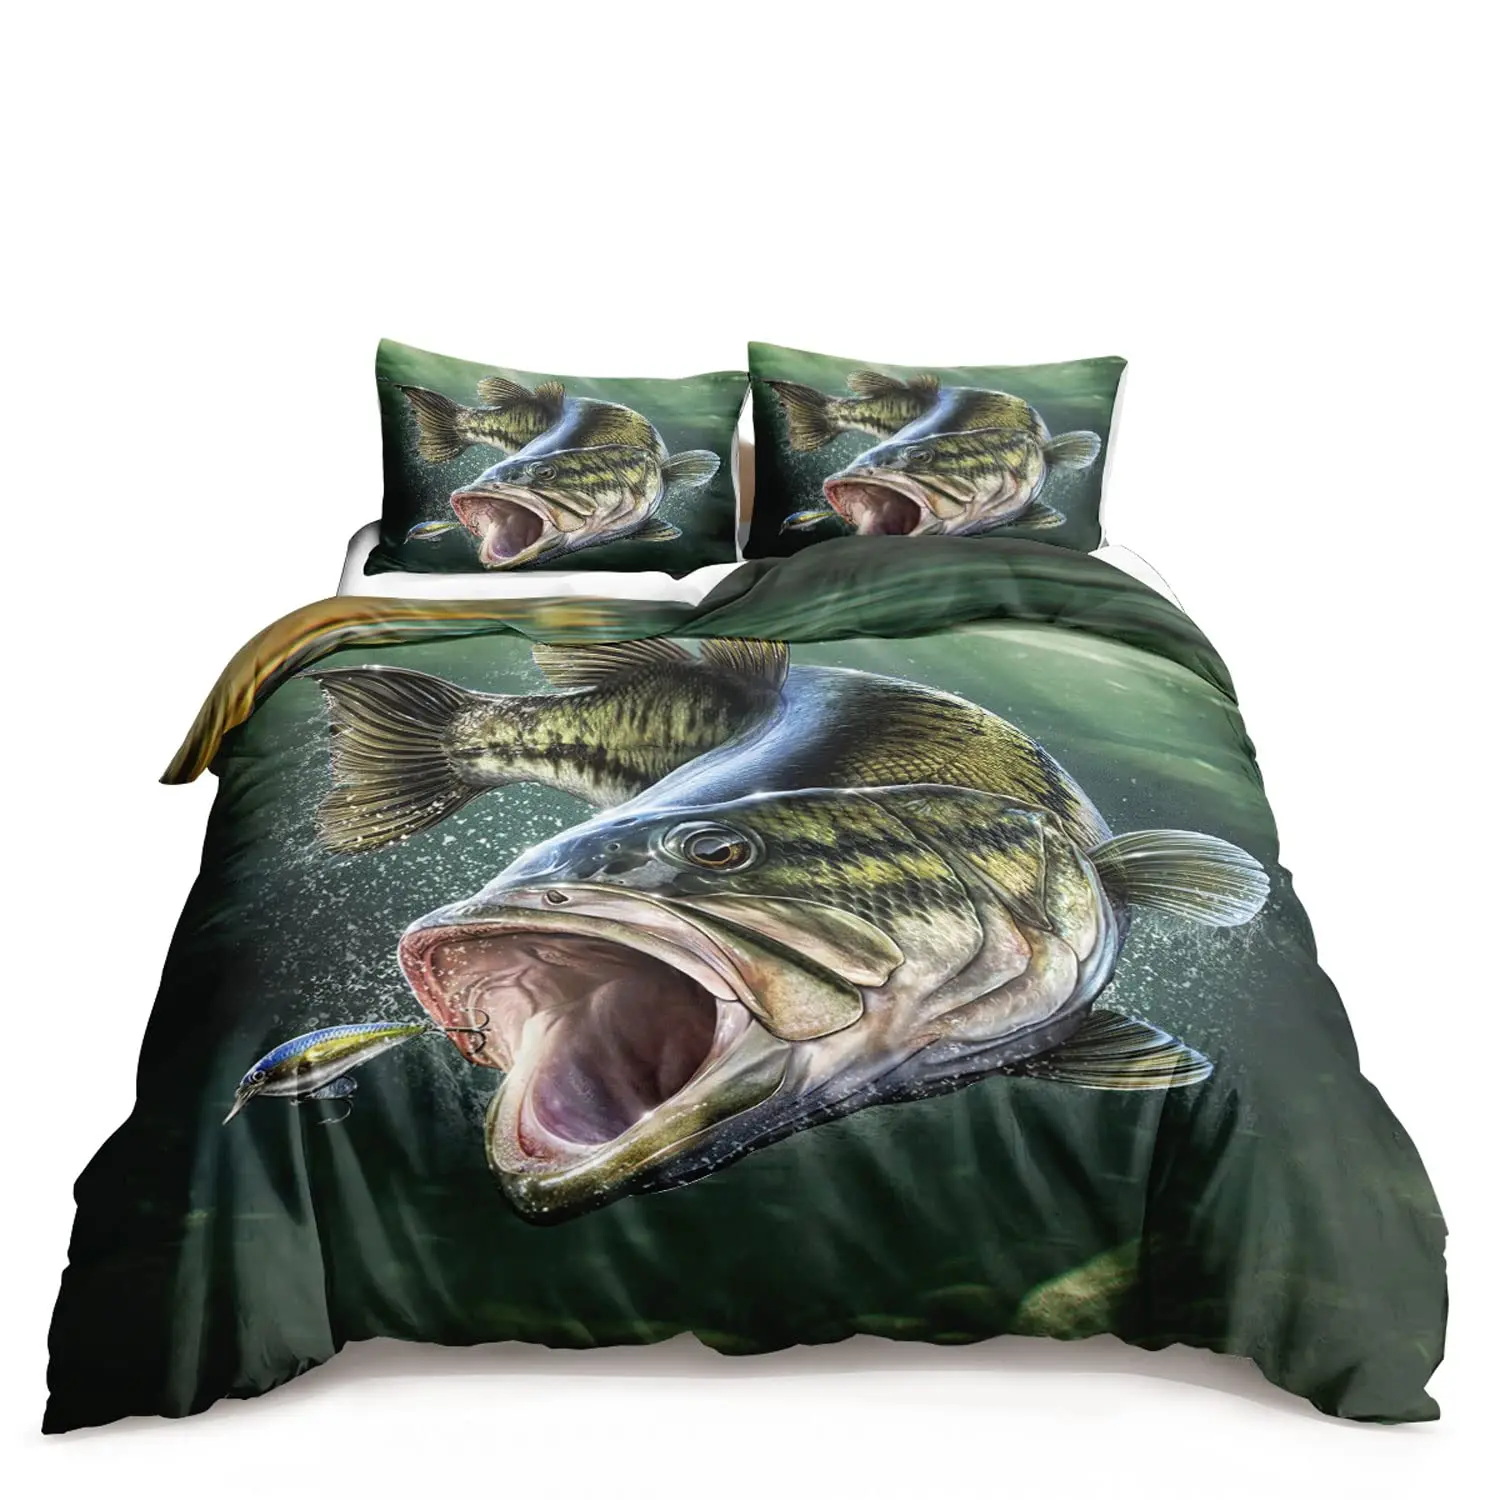 King Duvet Cover Salmon Duvet Cover Fishing Pattern Bedding Comforters Fish  Style Comforter Sets 102x90 inch（260x230 cm）1 Quilt Cover 2 Pillowcase :  : Home